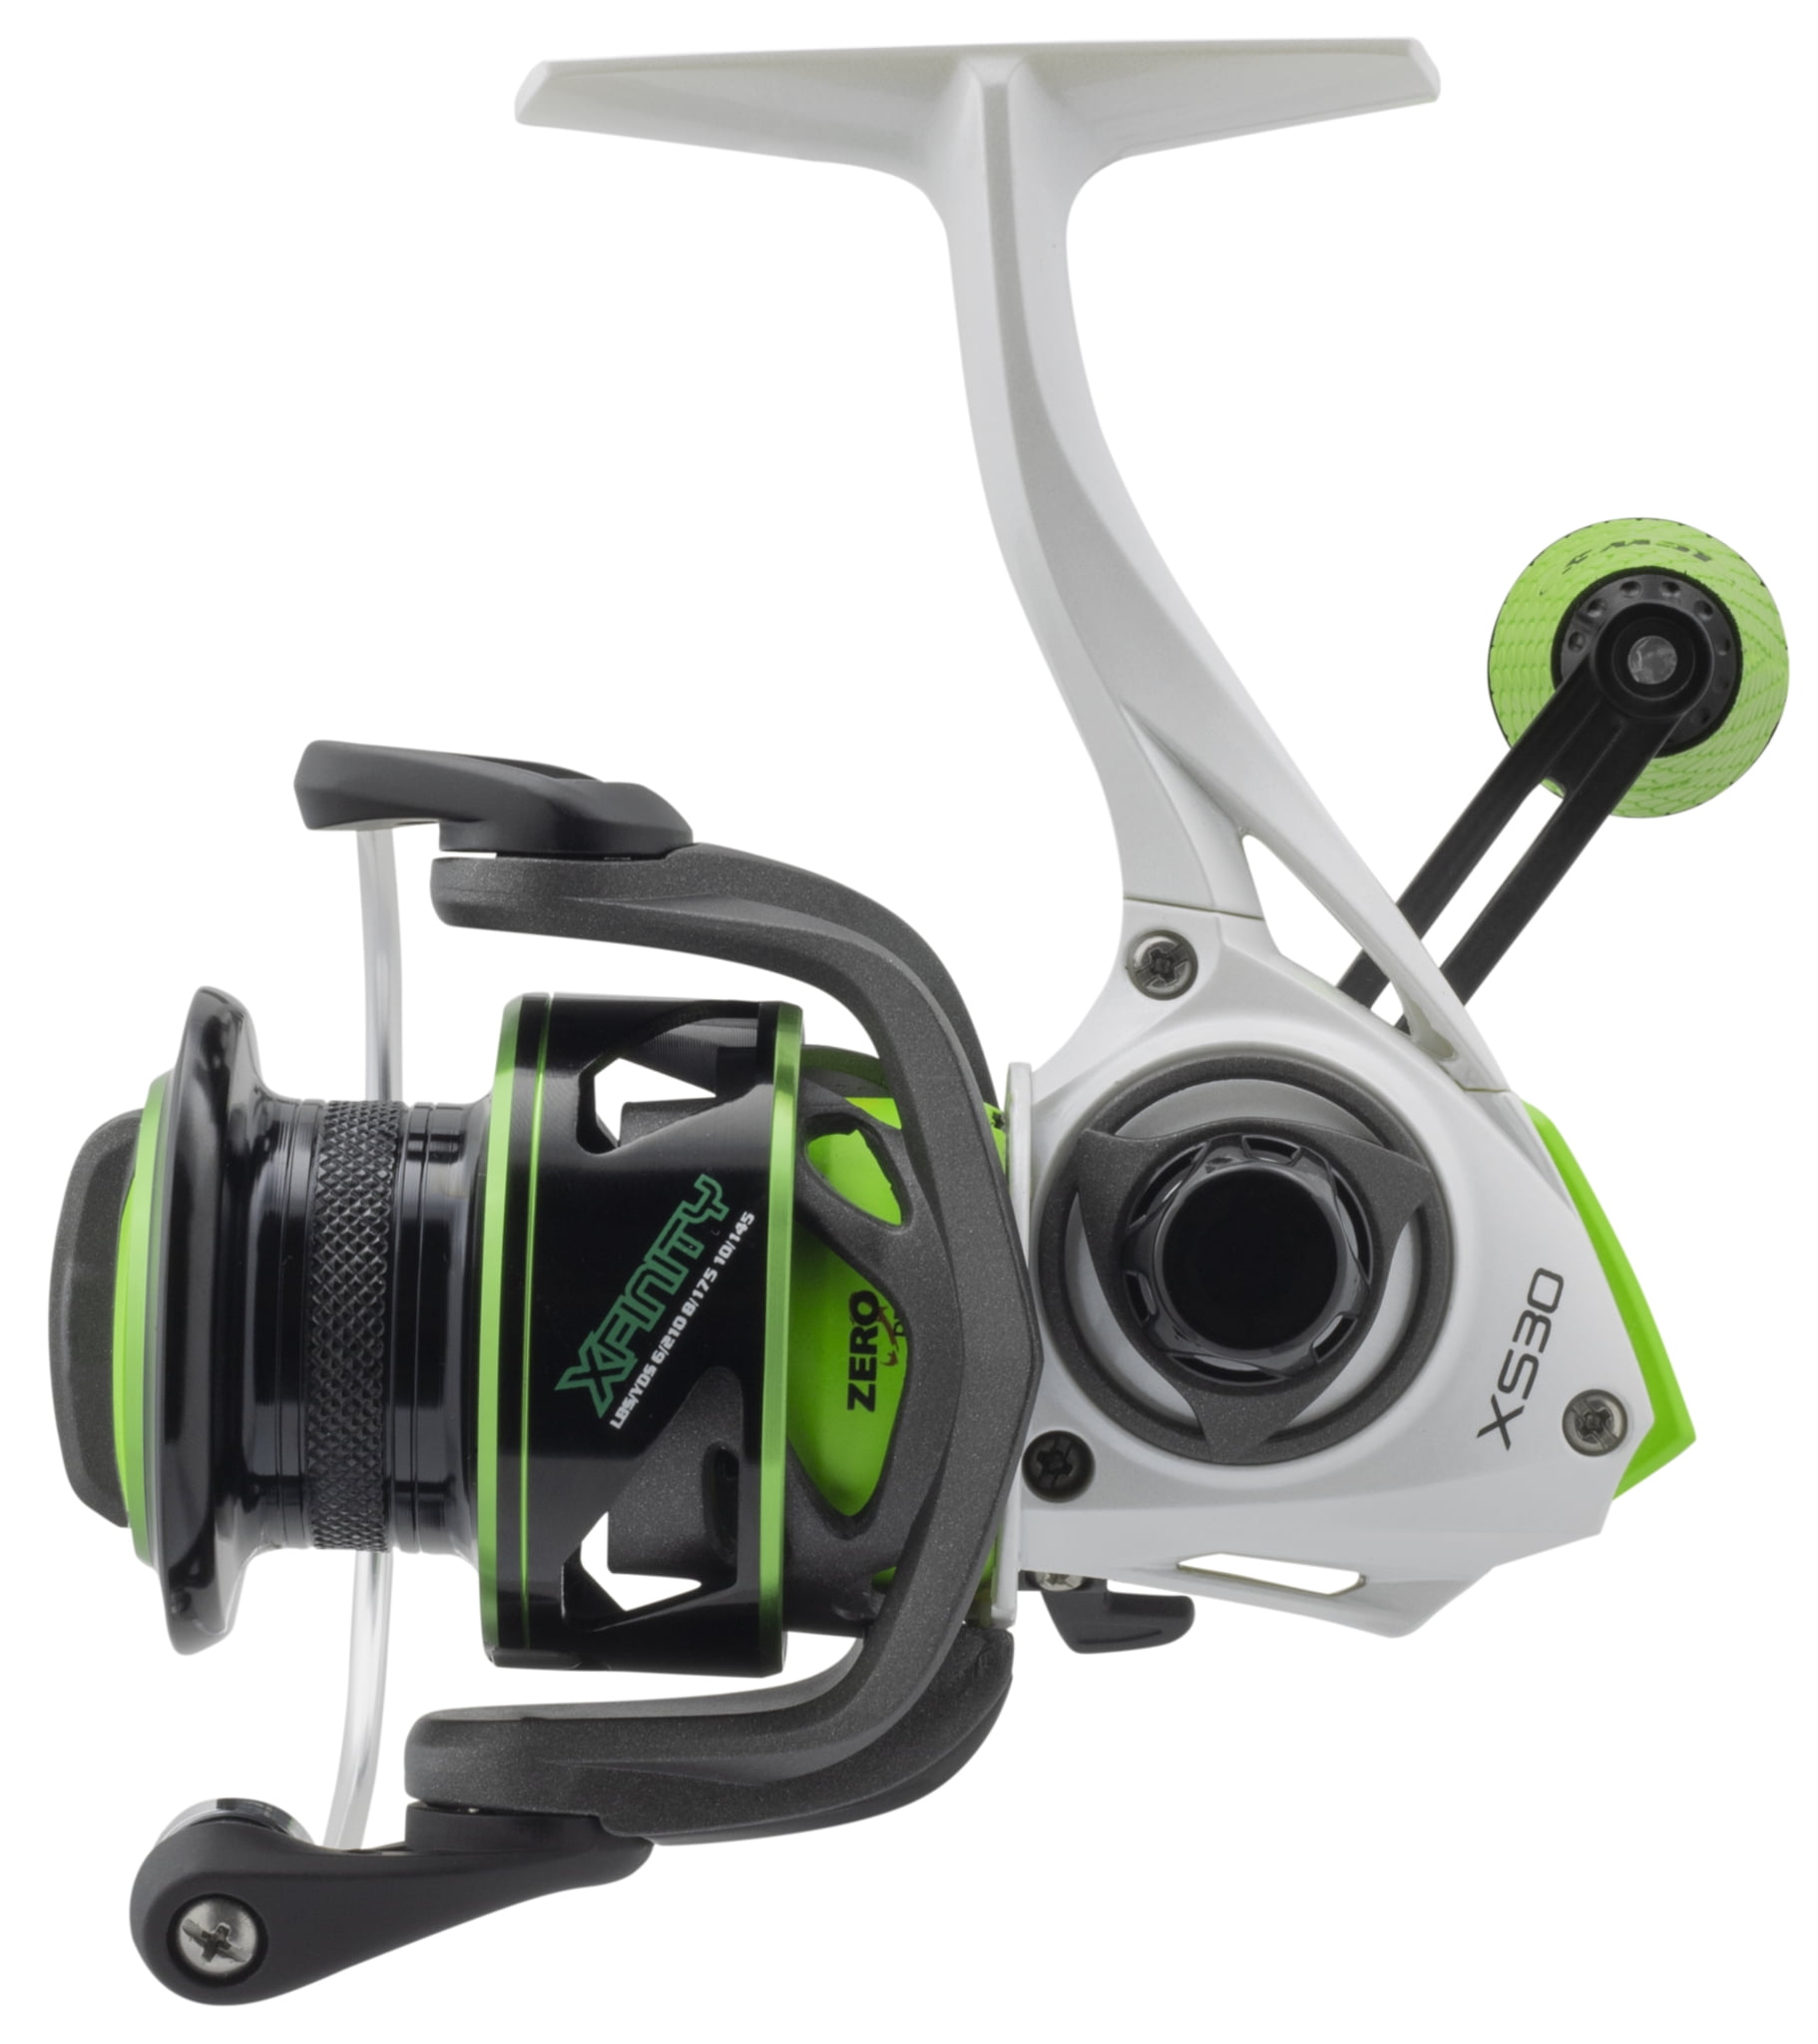 LEW'S SPEED SPIN SPINNING REELS – The Bass Hole